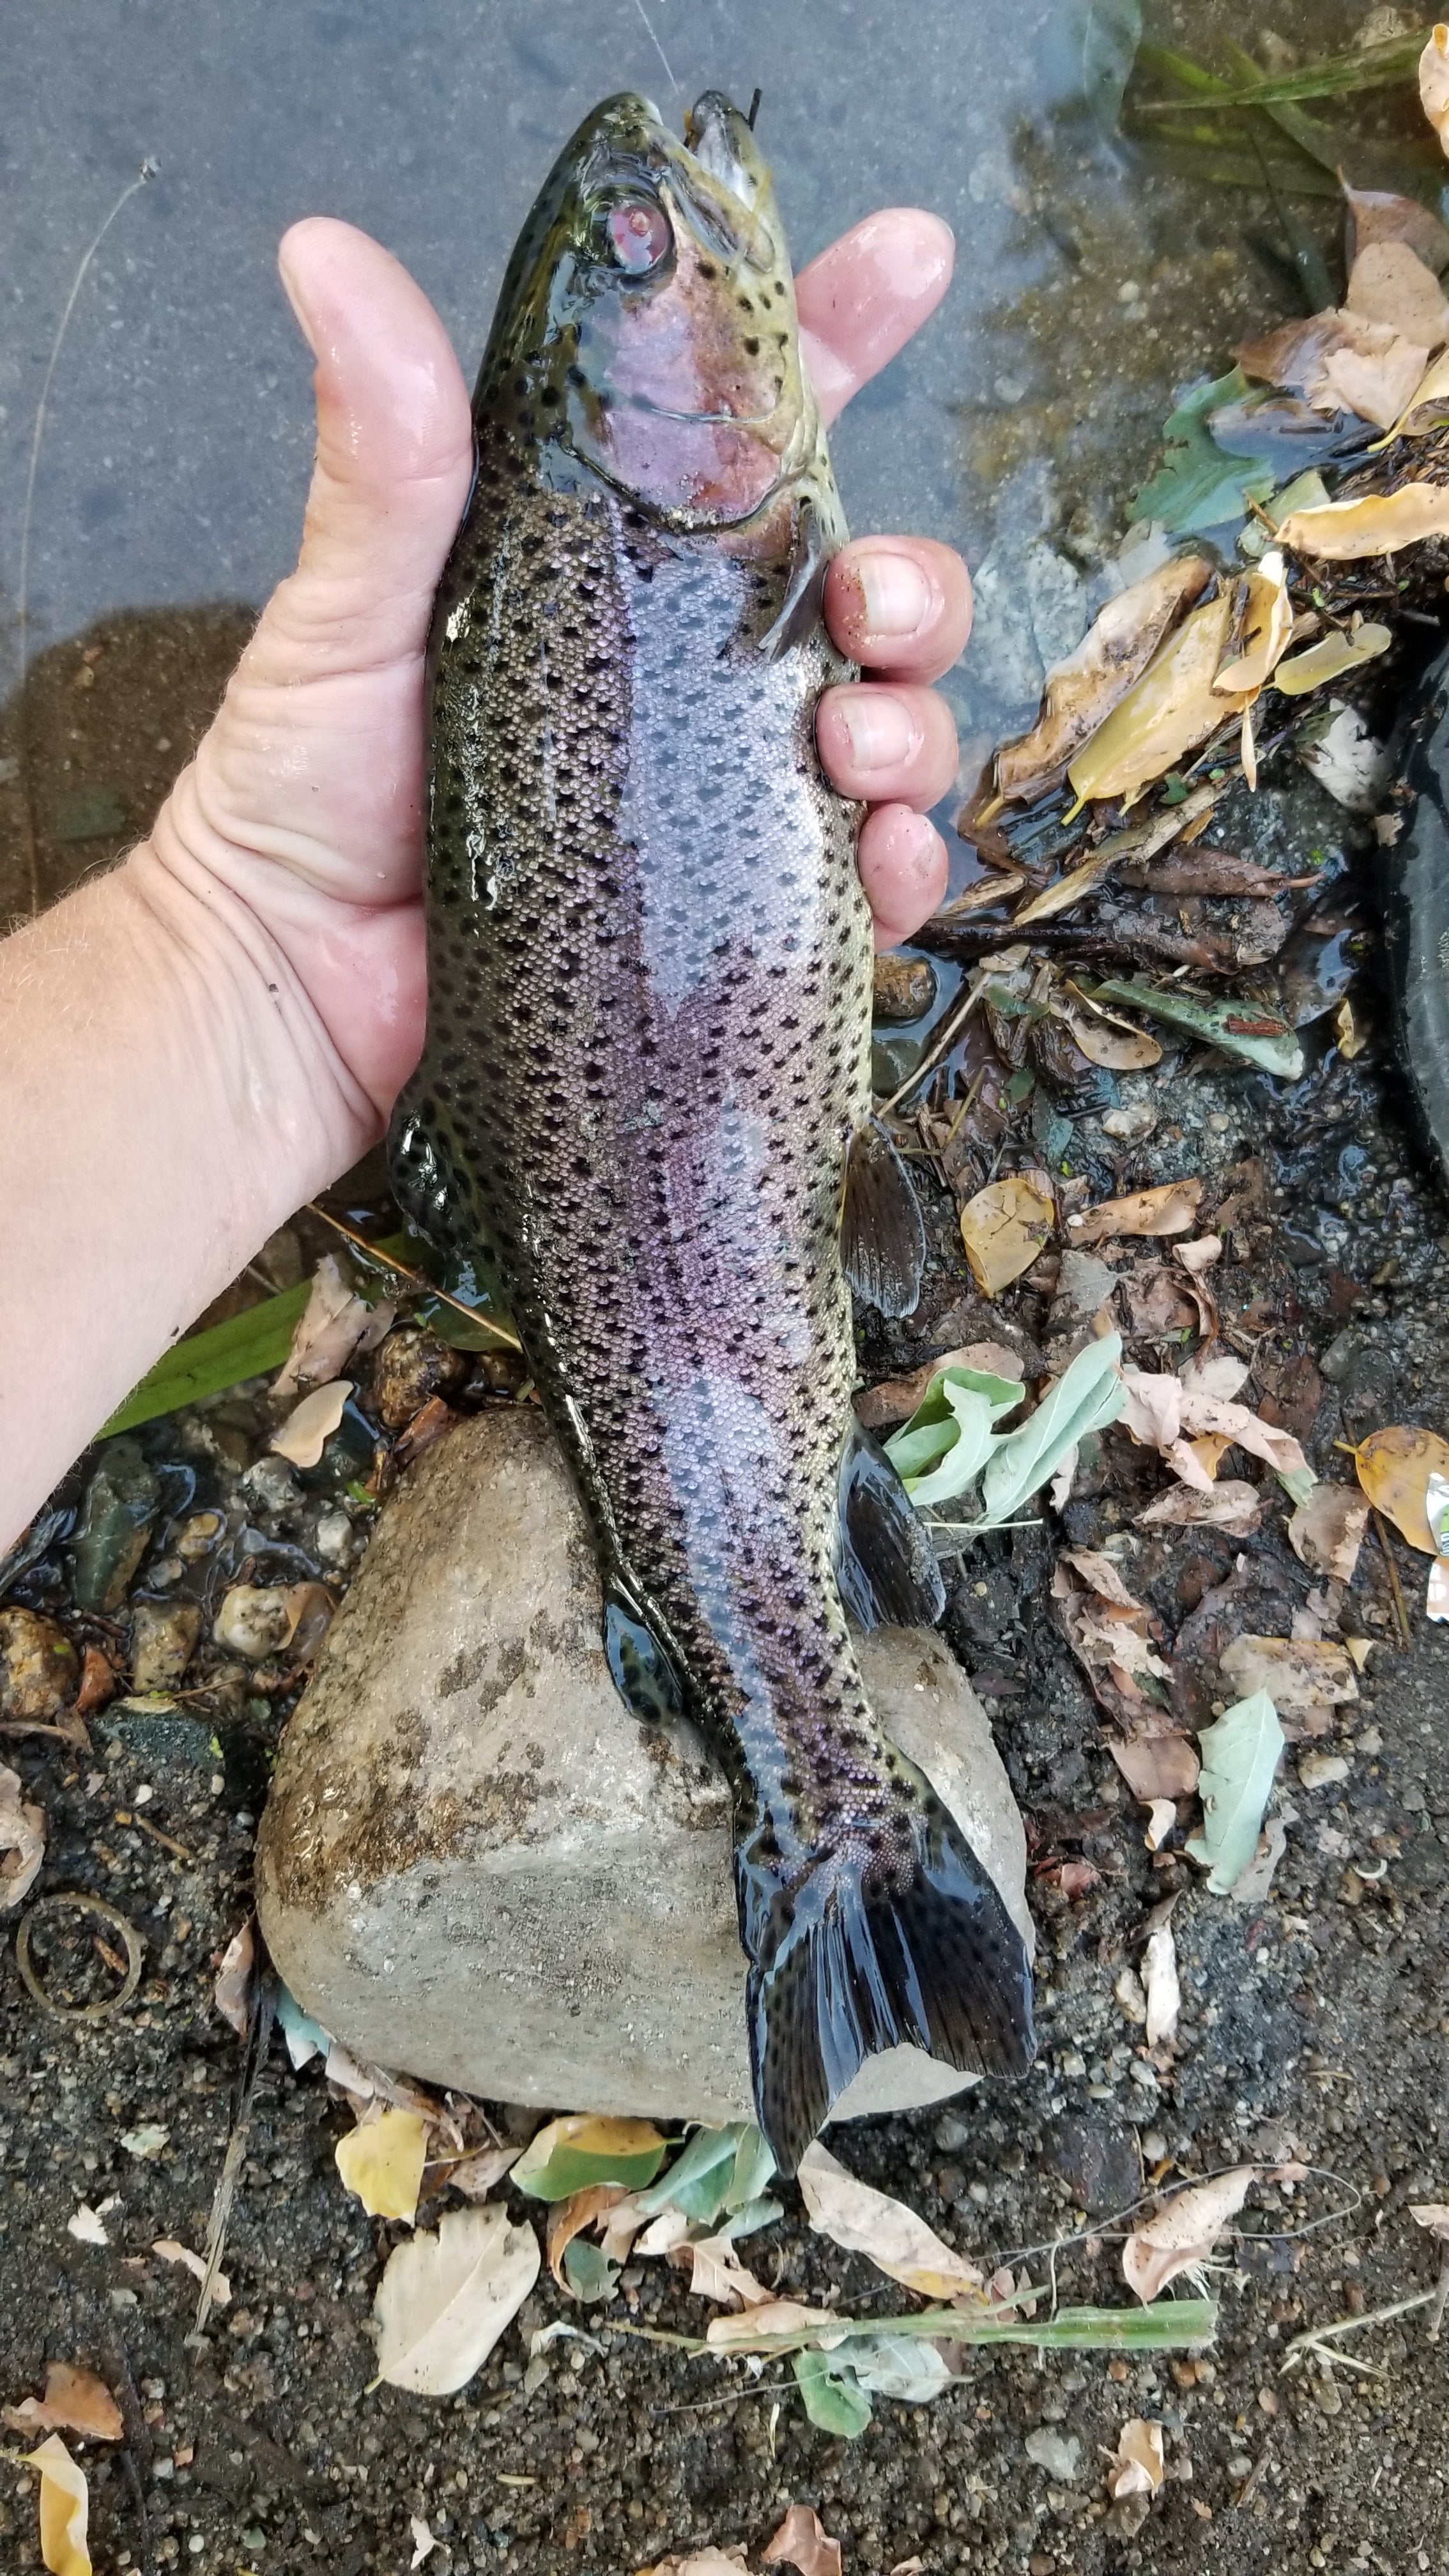 fishing was excellent, not wild trout but stocked